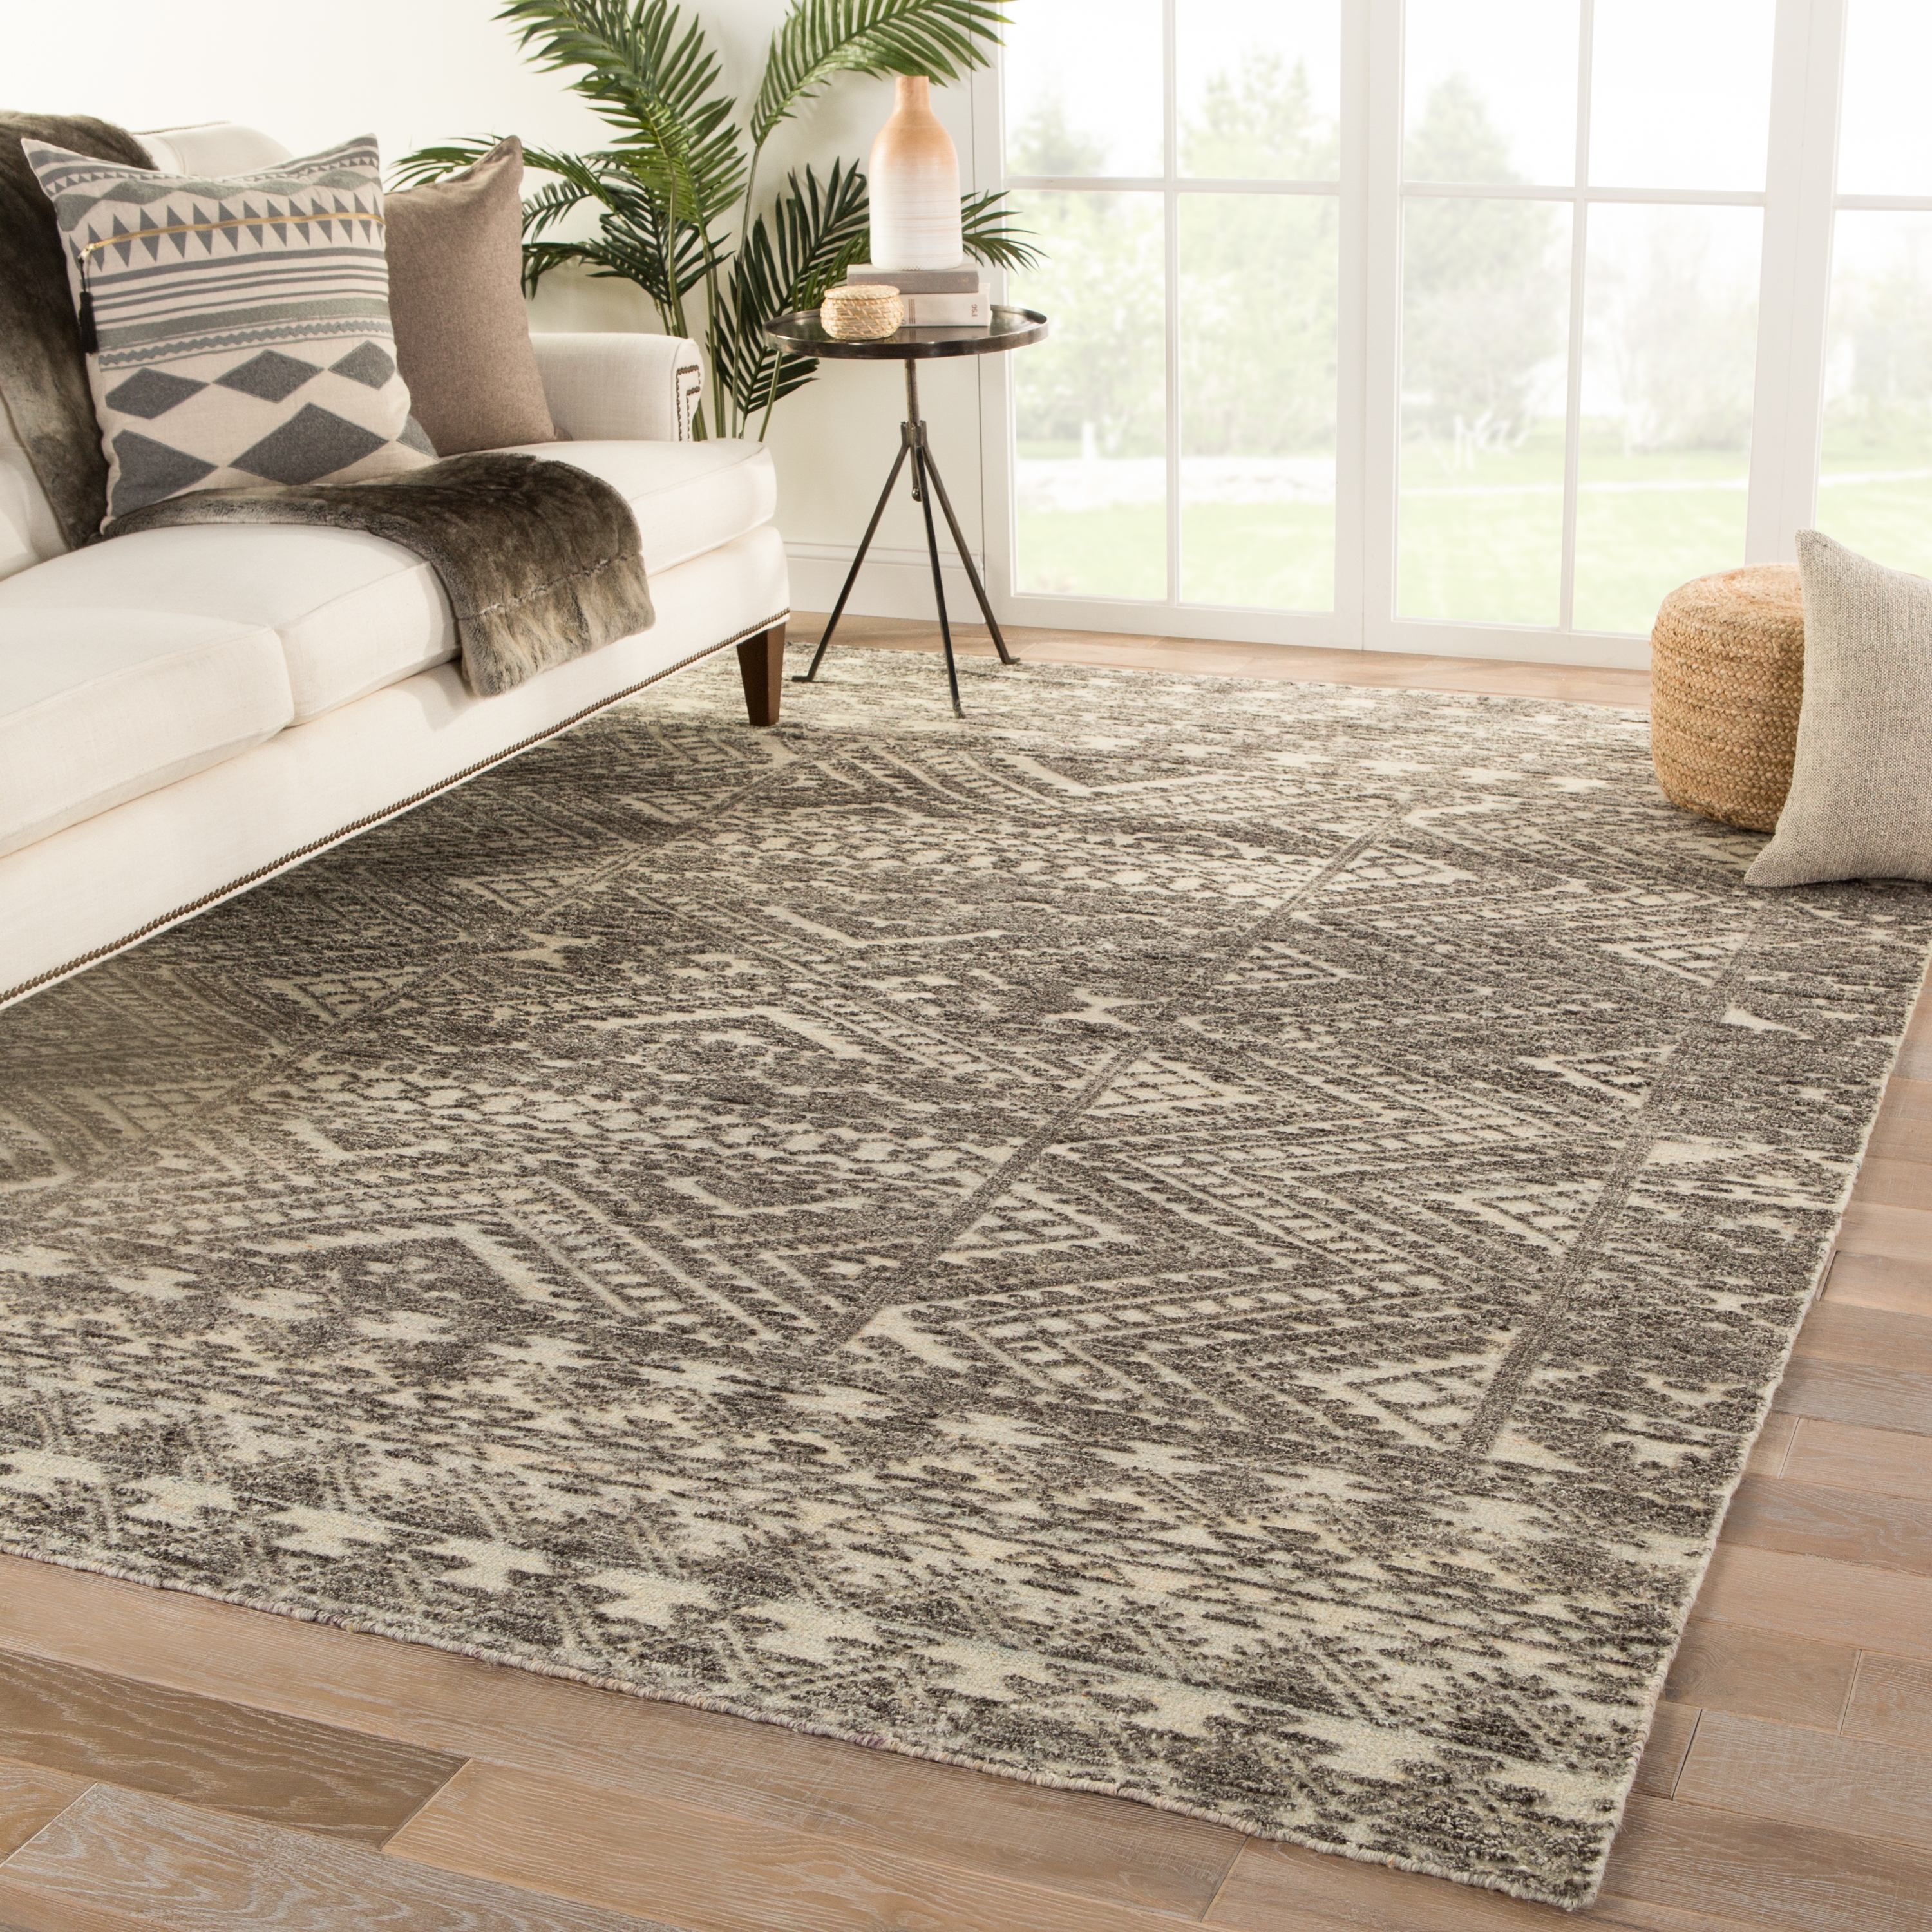 Prentice Hand-Knotted Geometric Dark Gray/ Taupe Area Rug (8'X11') - Image 4